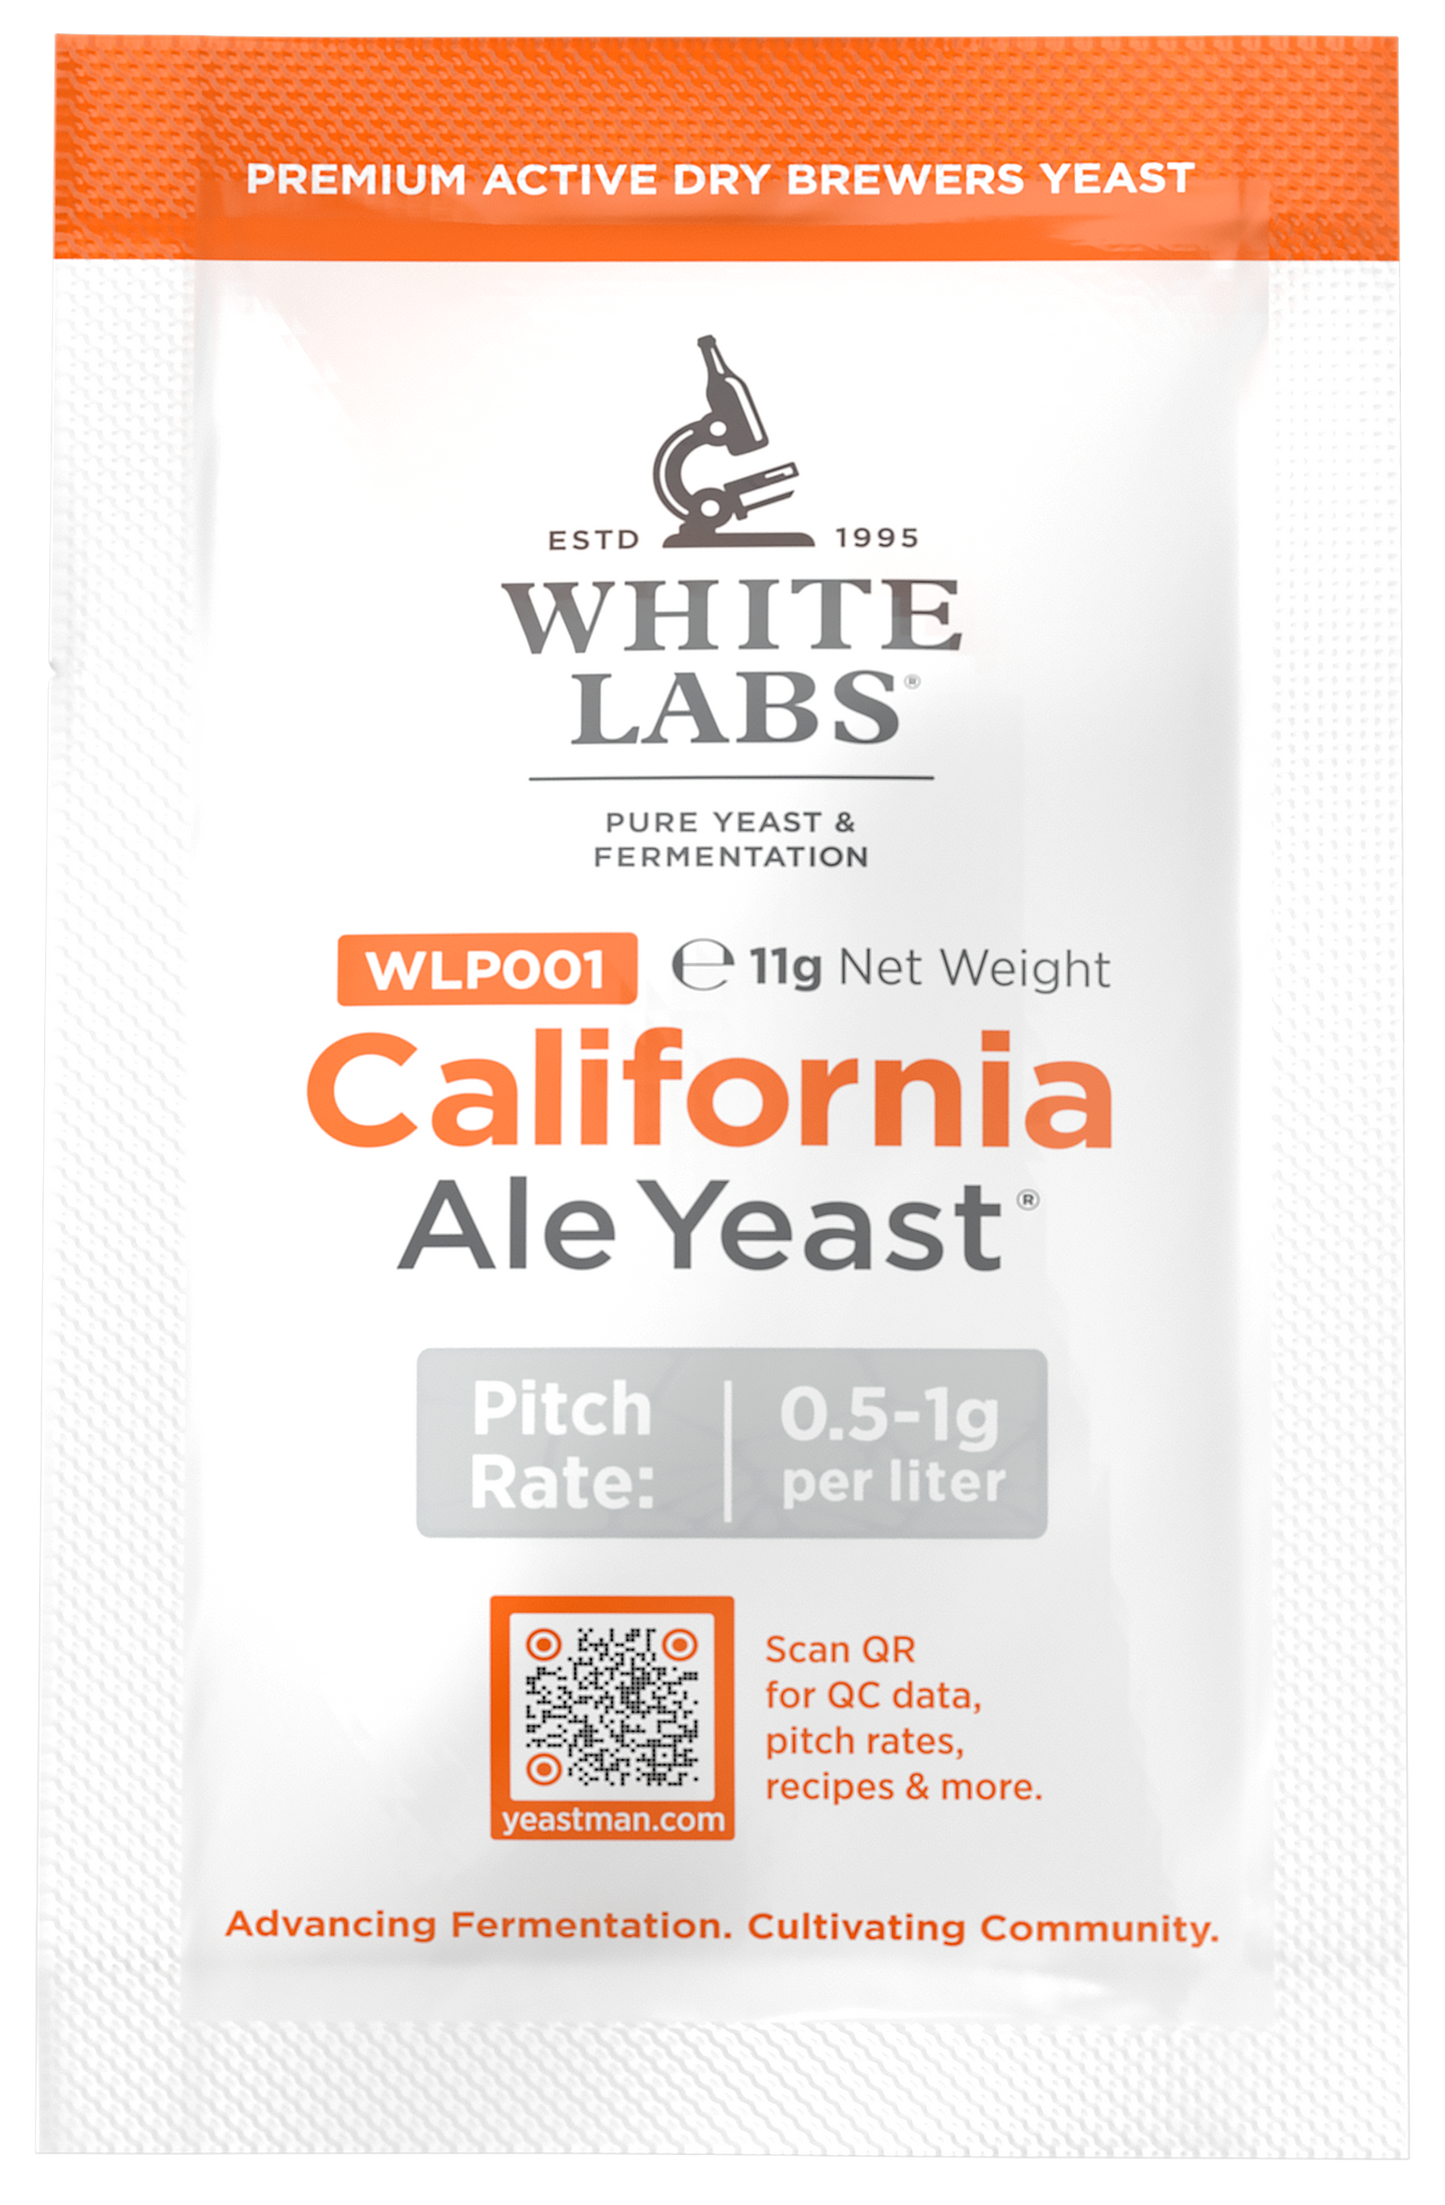 California Ale Yeast (Dry Yeast) by White Labs - WLPD001